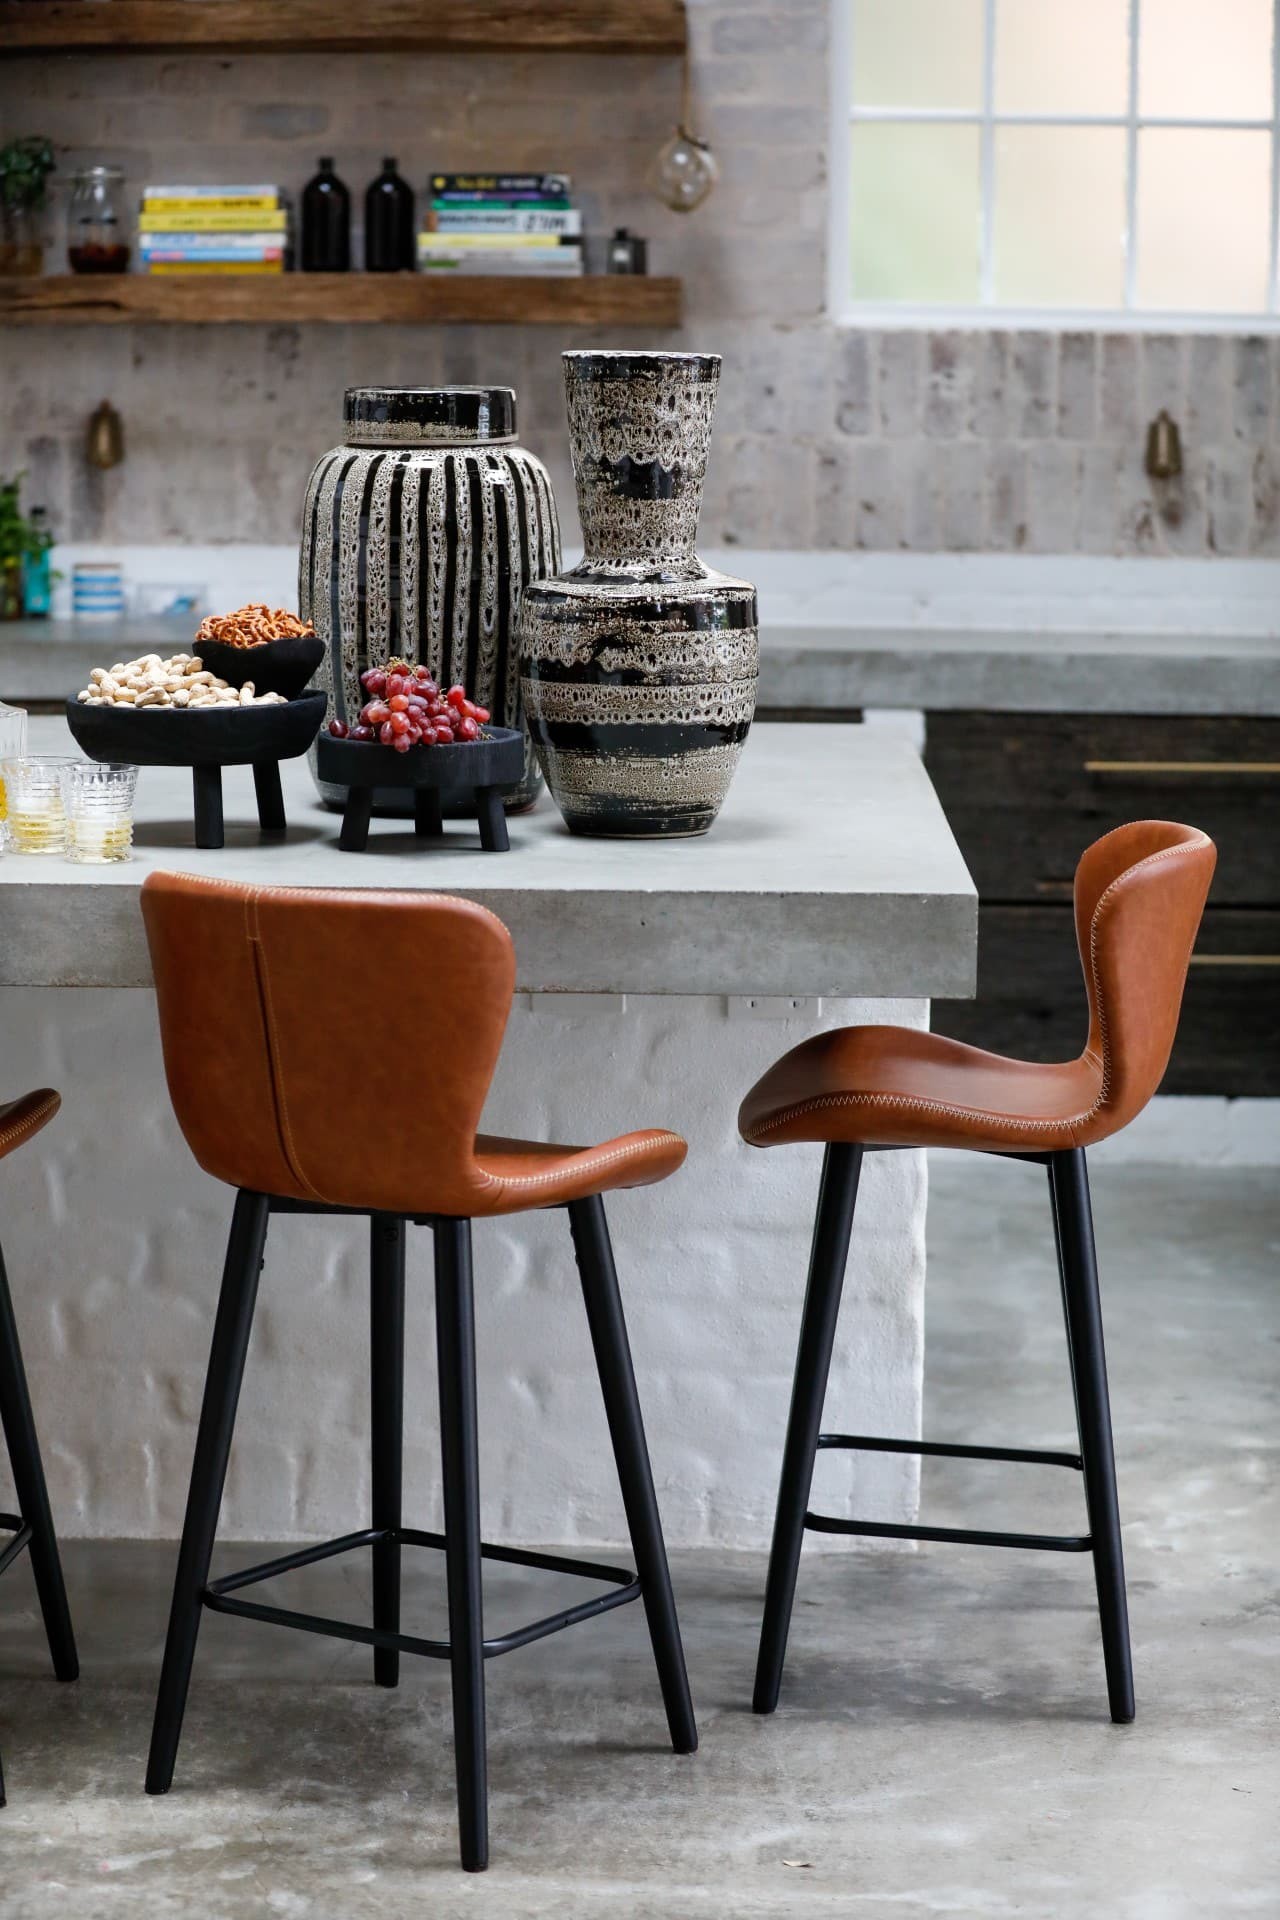 tan leather bench stools in industrial warehouse kitchen with ceramic vases